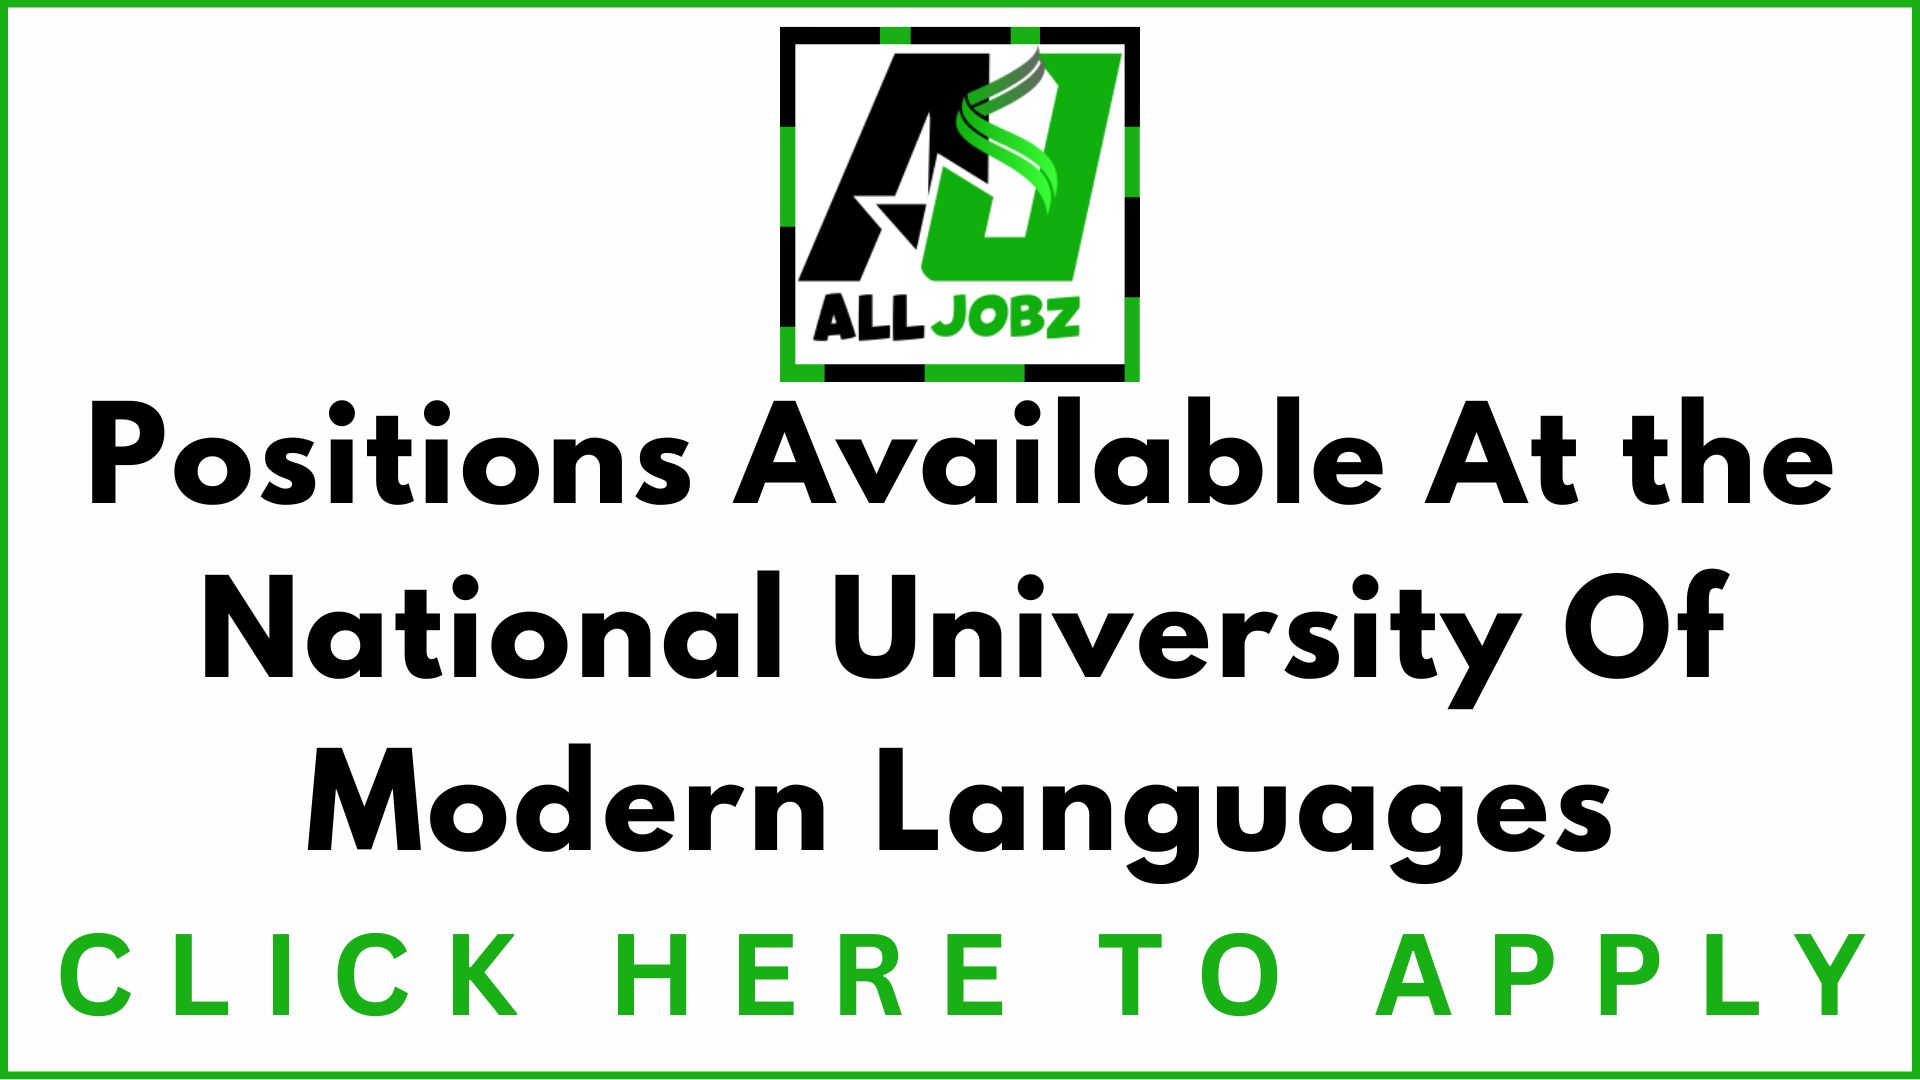 Positions Available At The National University Of Modern Languages